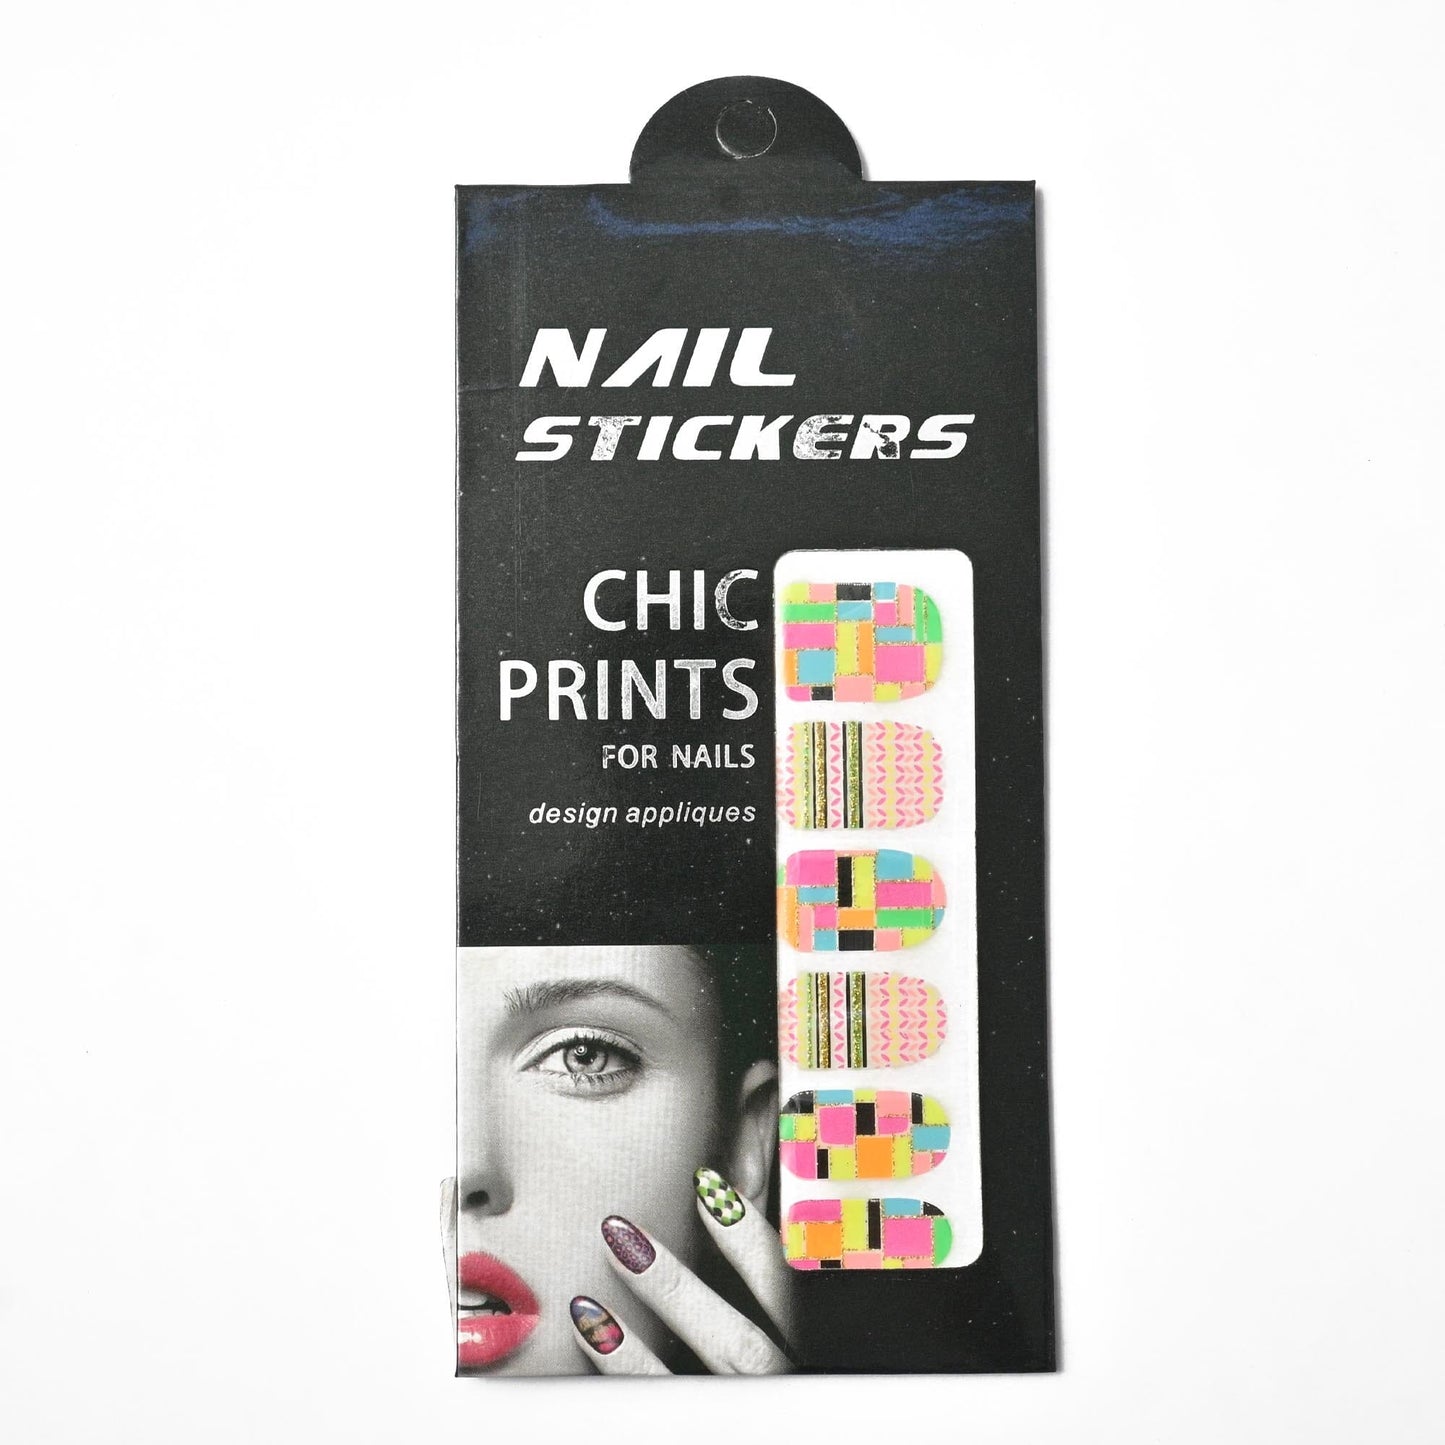 Chic Prints Women's Nail Stickers - Pack Of 12 Health & Beauty SRL D19 